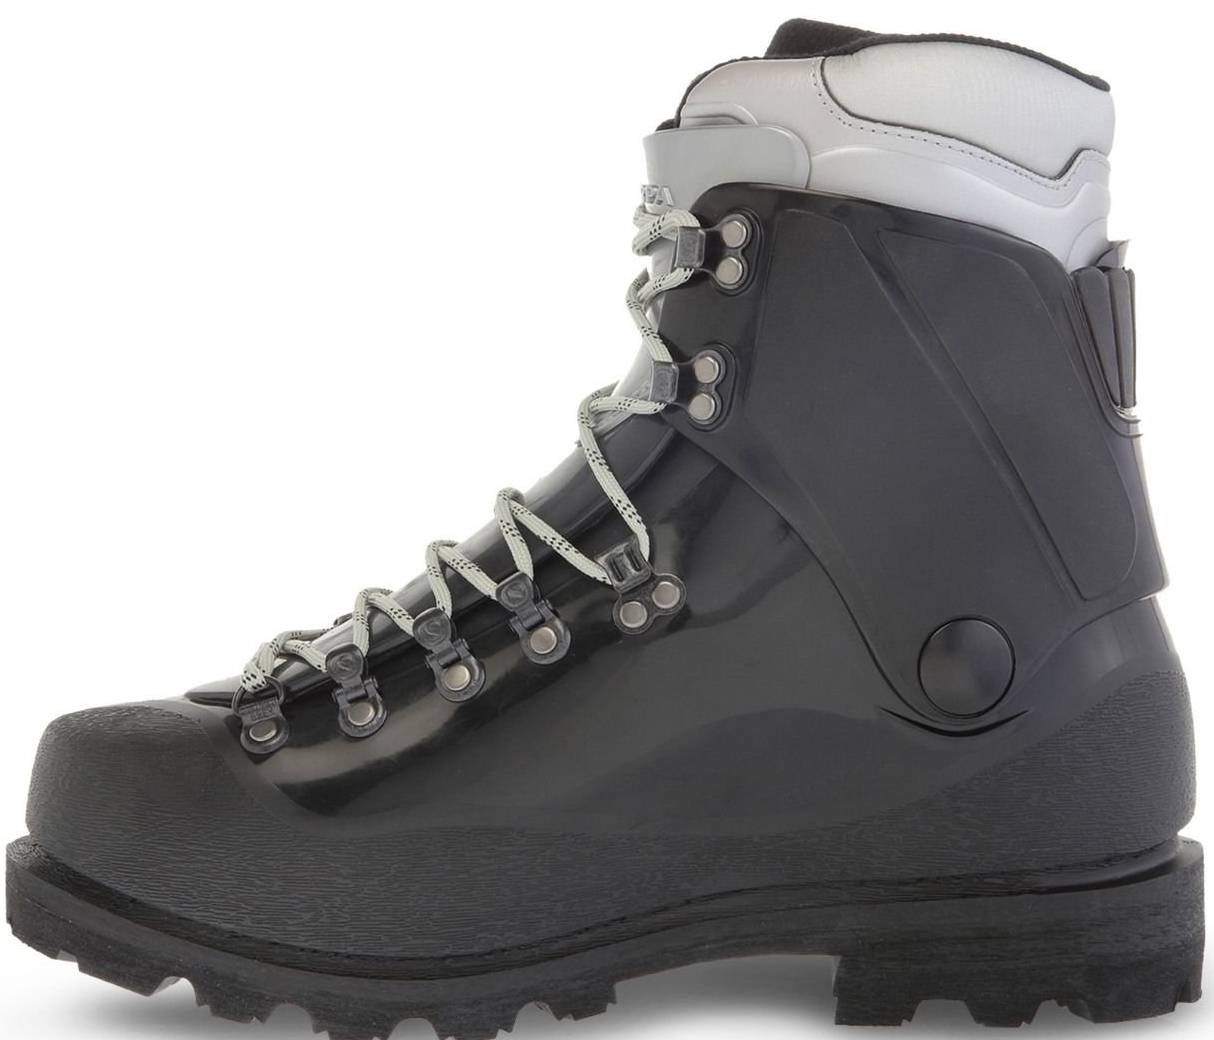 SCARPA Inverno Waterproof Boots for Climbing and Mountaineering 